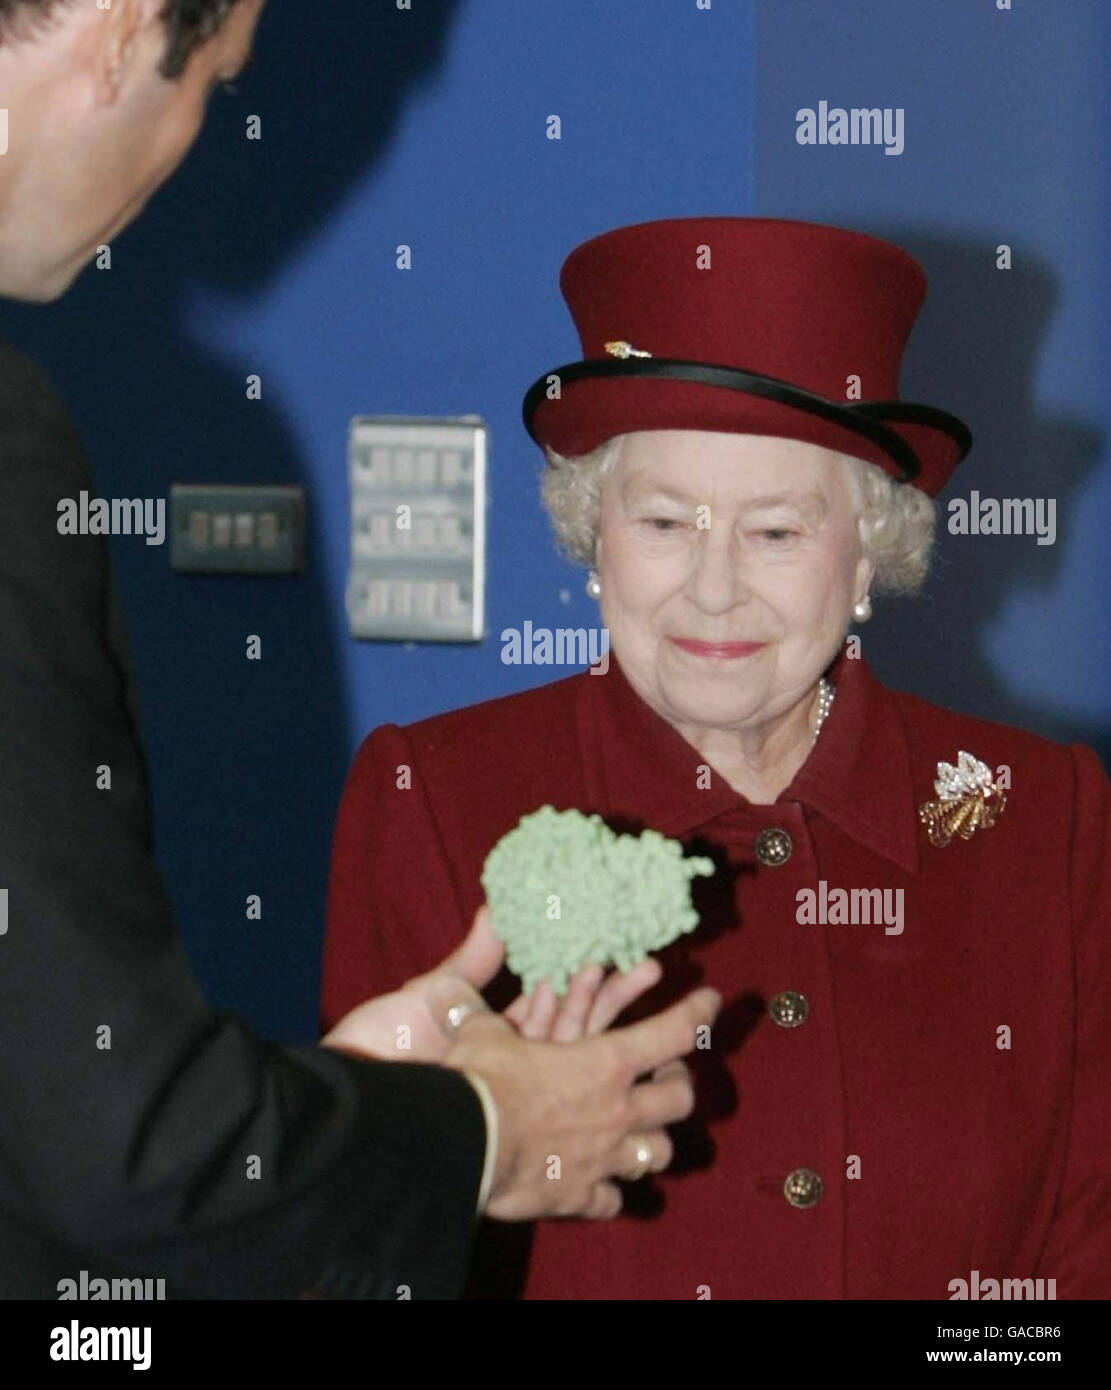 Queen Elizabeth II during her tour of the new Diamond Light Source at Didcot in Oxfordshire. The Queen is pictured with a model of a 'Flu Virus' (green blob) while on the tour of the facility which houses the new Diamond Light Source synchrotron. Stock Photo